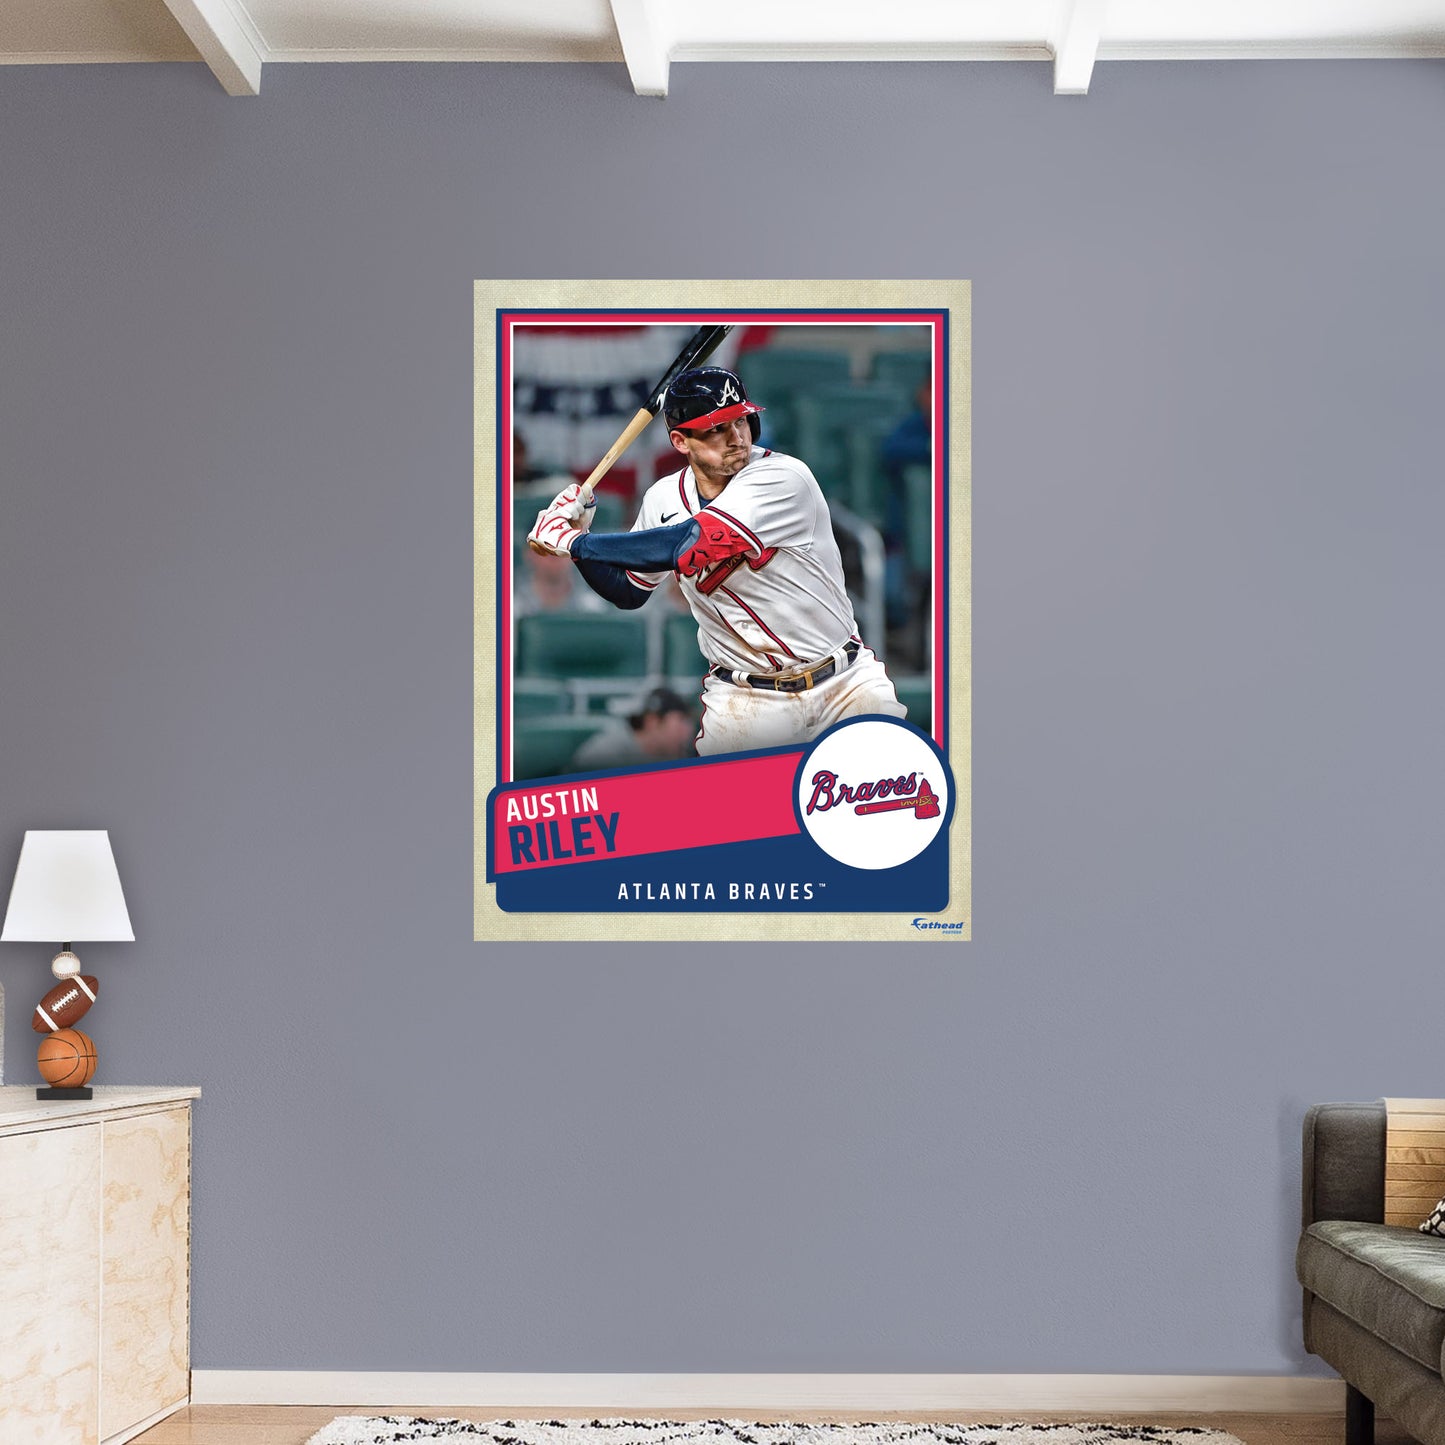 Atlanta Braves: Austin Riley  Poster        - Officially Licensed MLB Removable     Adhesive Decal